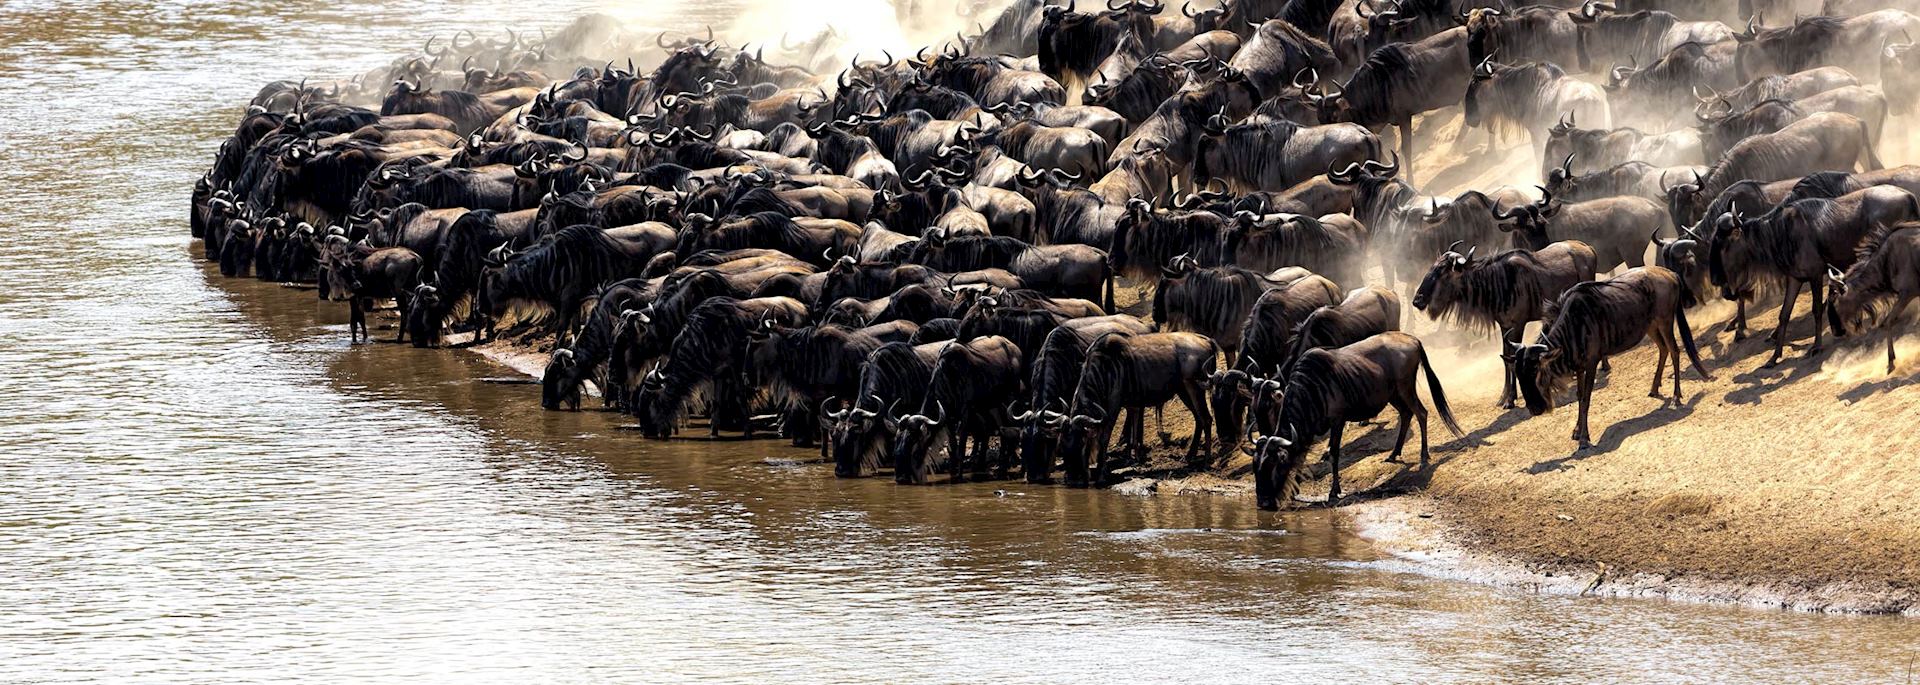 The great migration in Kenya